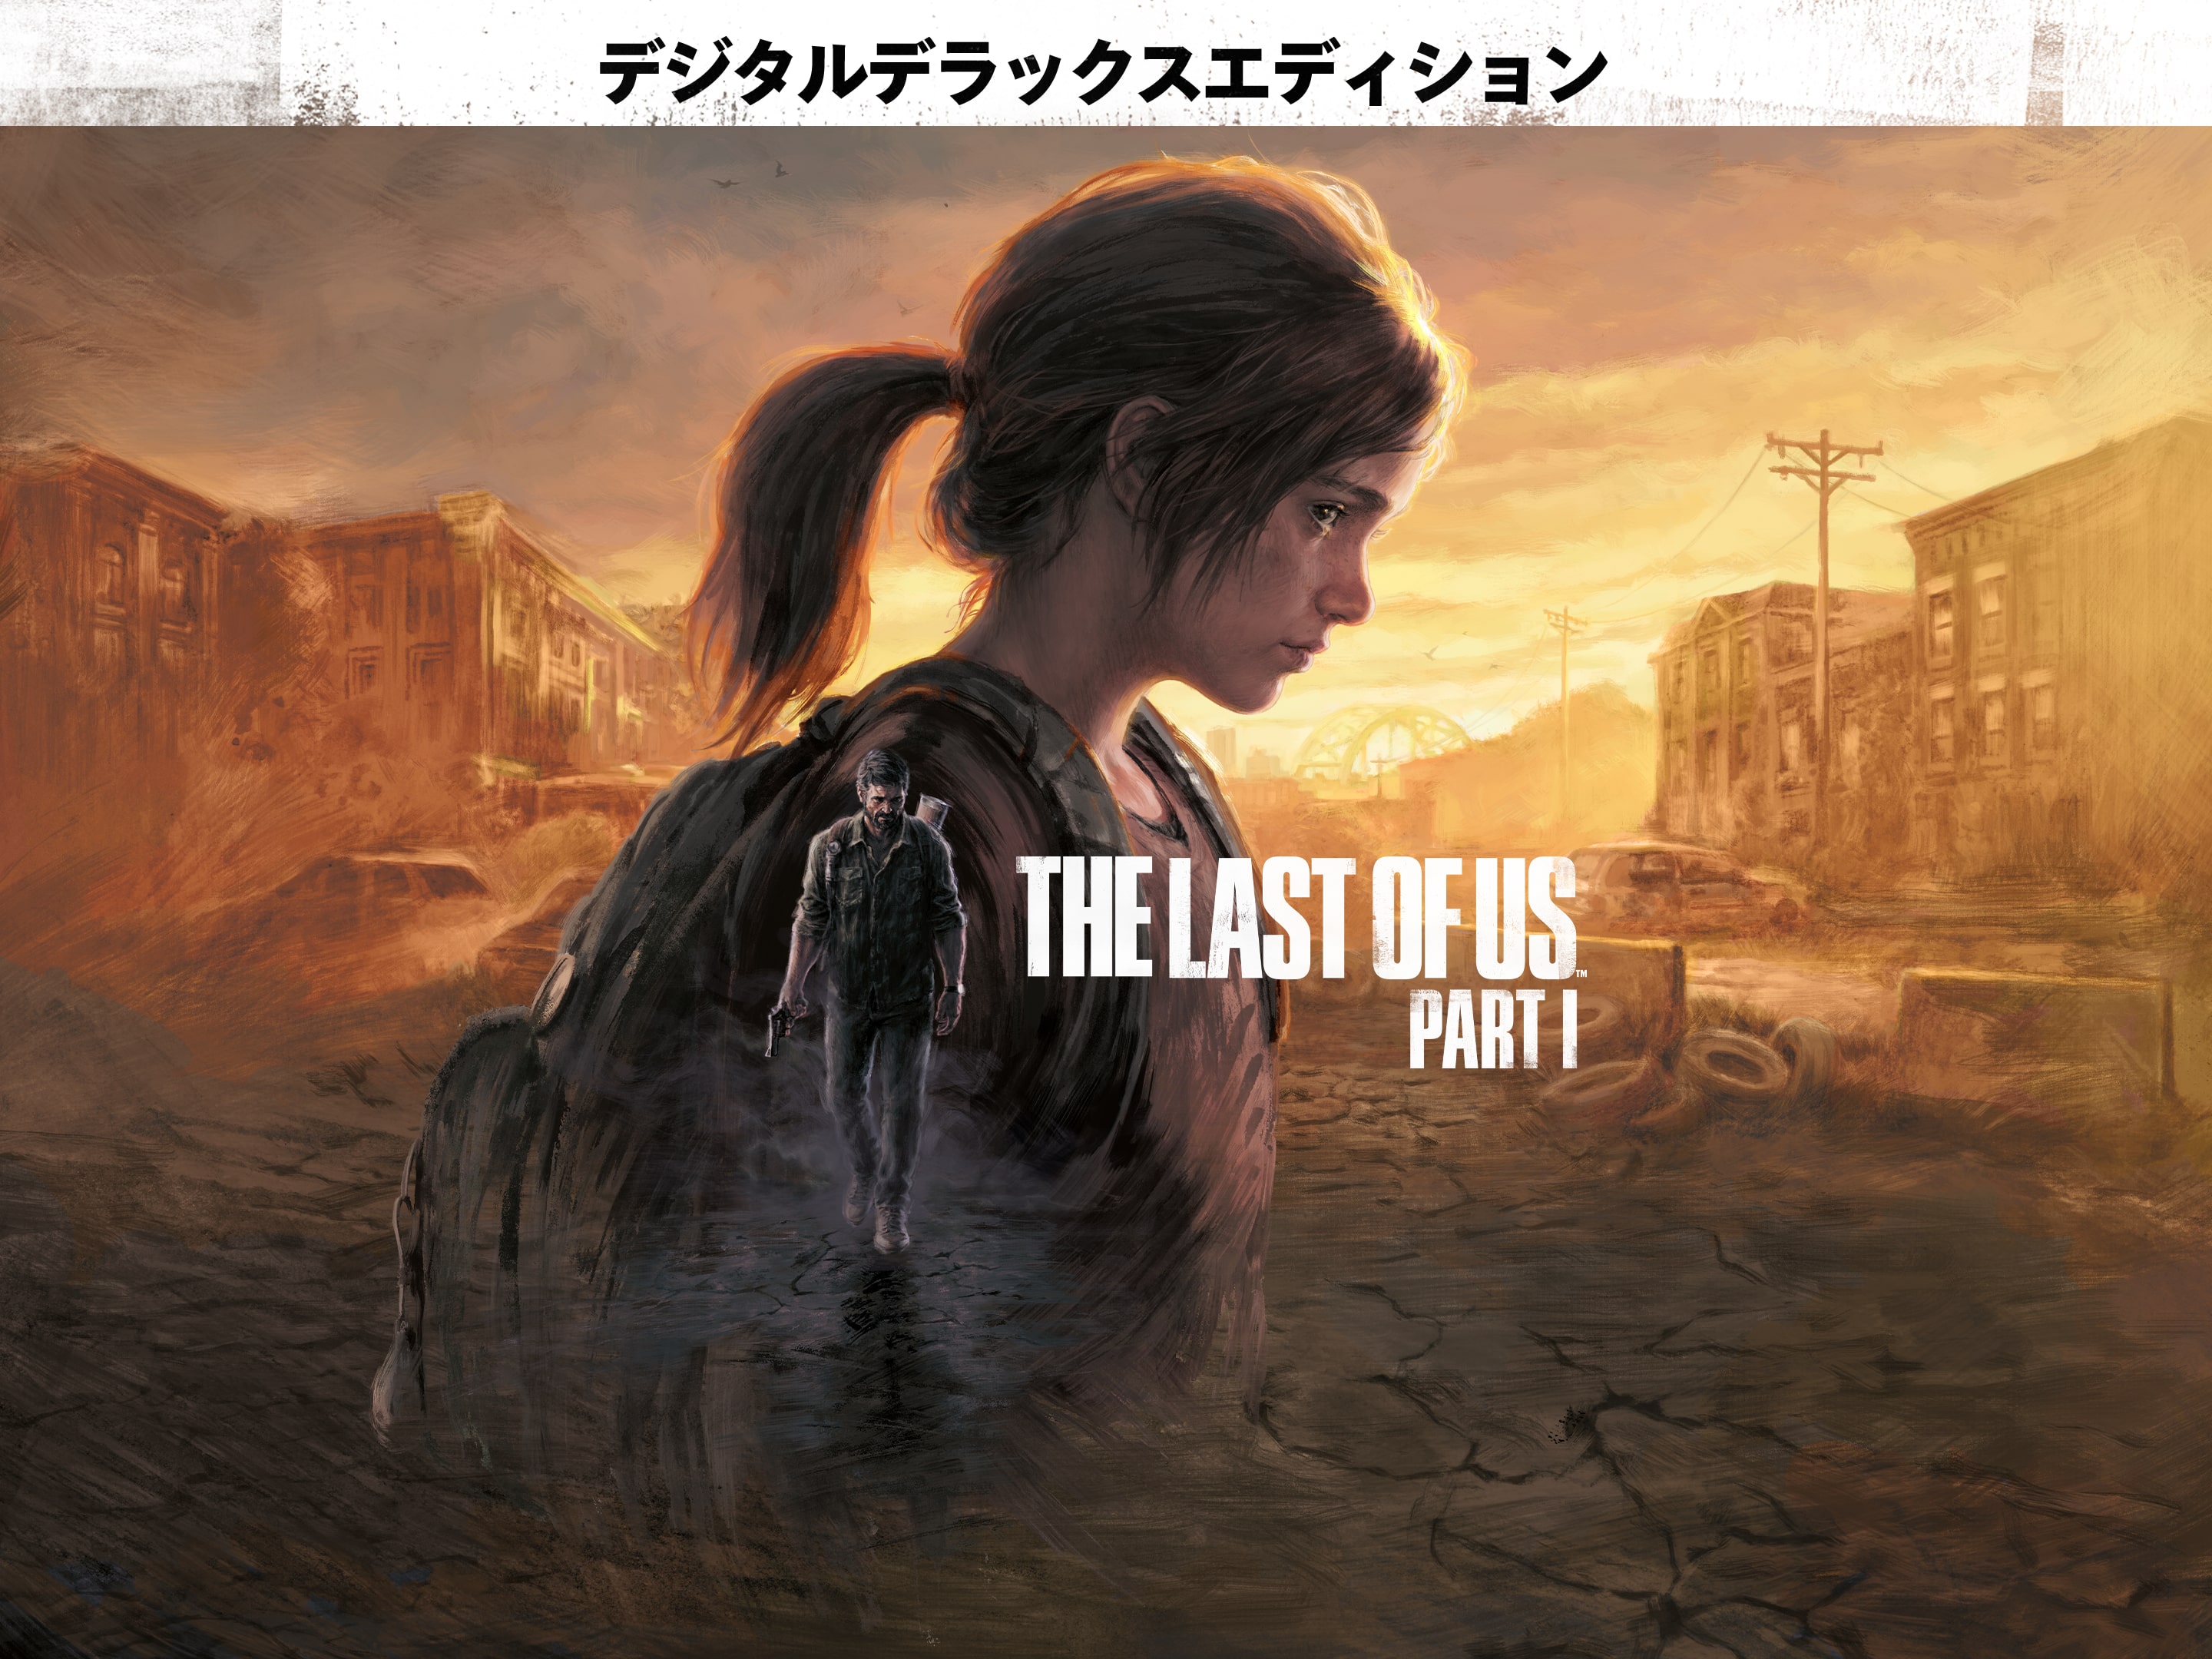 PS4 ソフト　The Last of Us Part II ラストオブアス